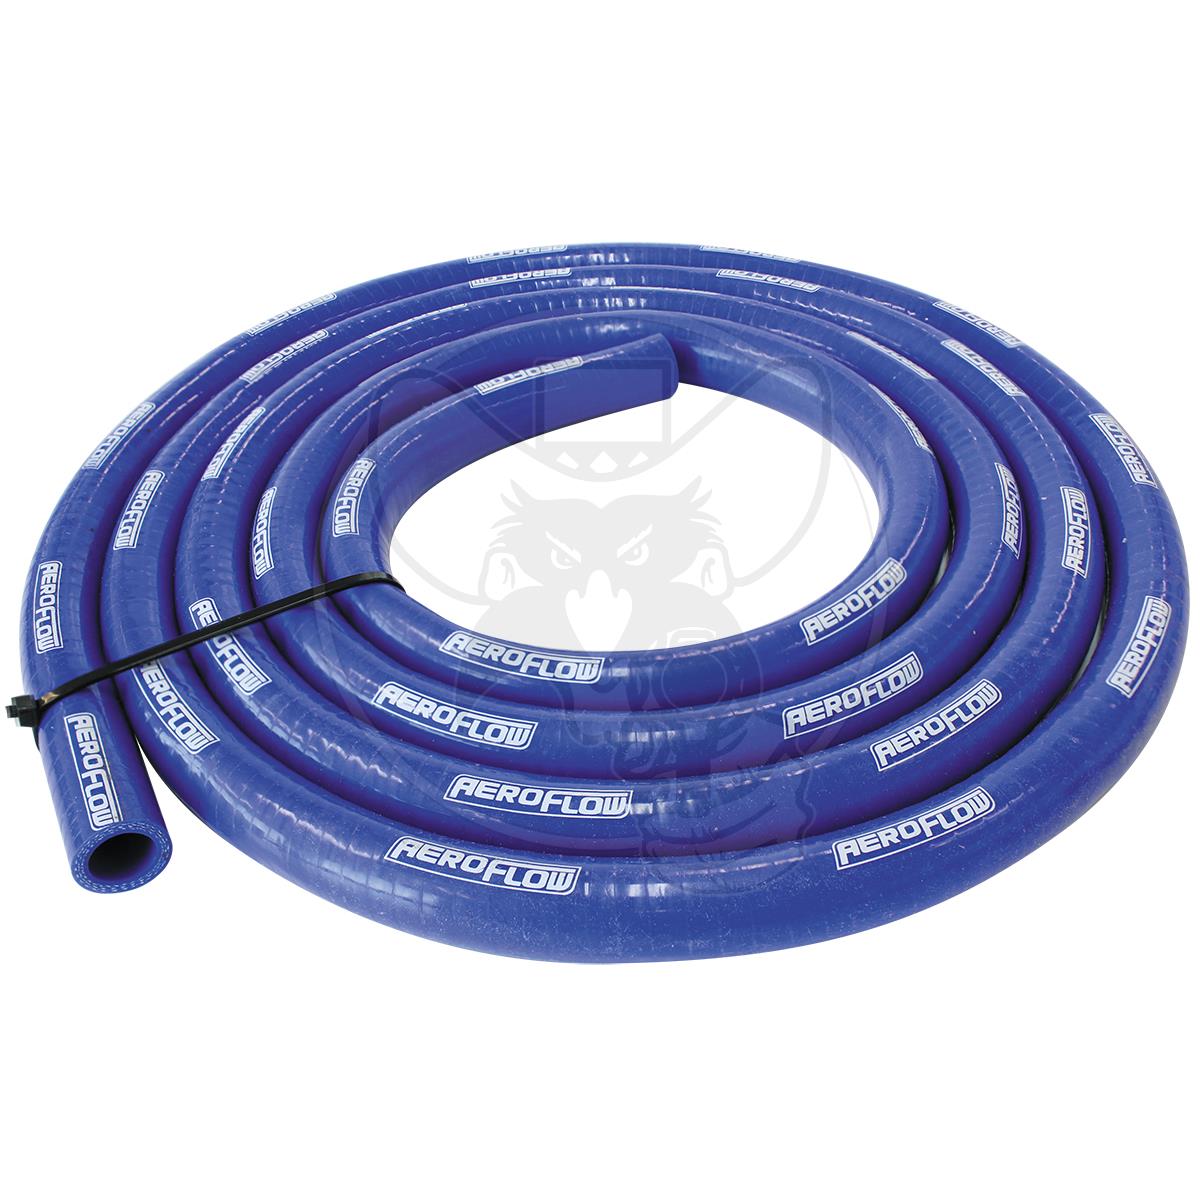 AF9051-150-5 Aeroflow 1.50" 38mm ID Heater Silicone Hose Gloss Blue 5ft 1.5M